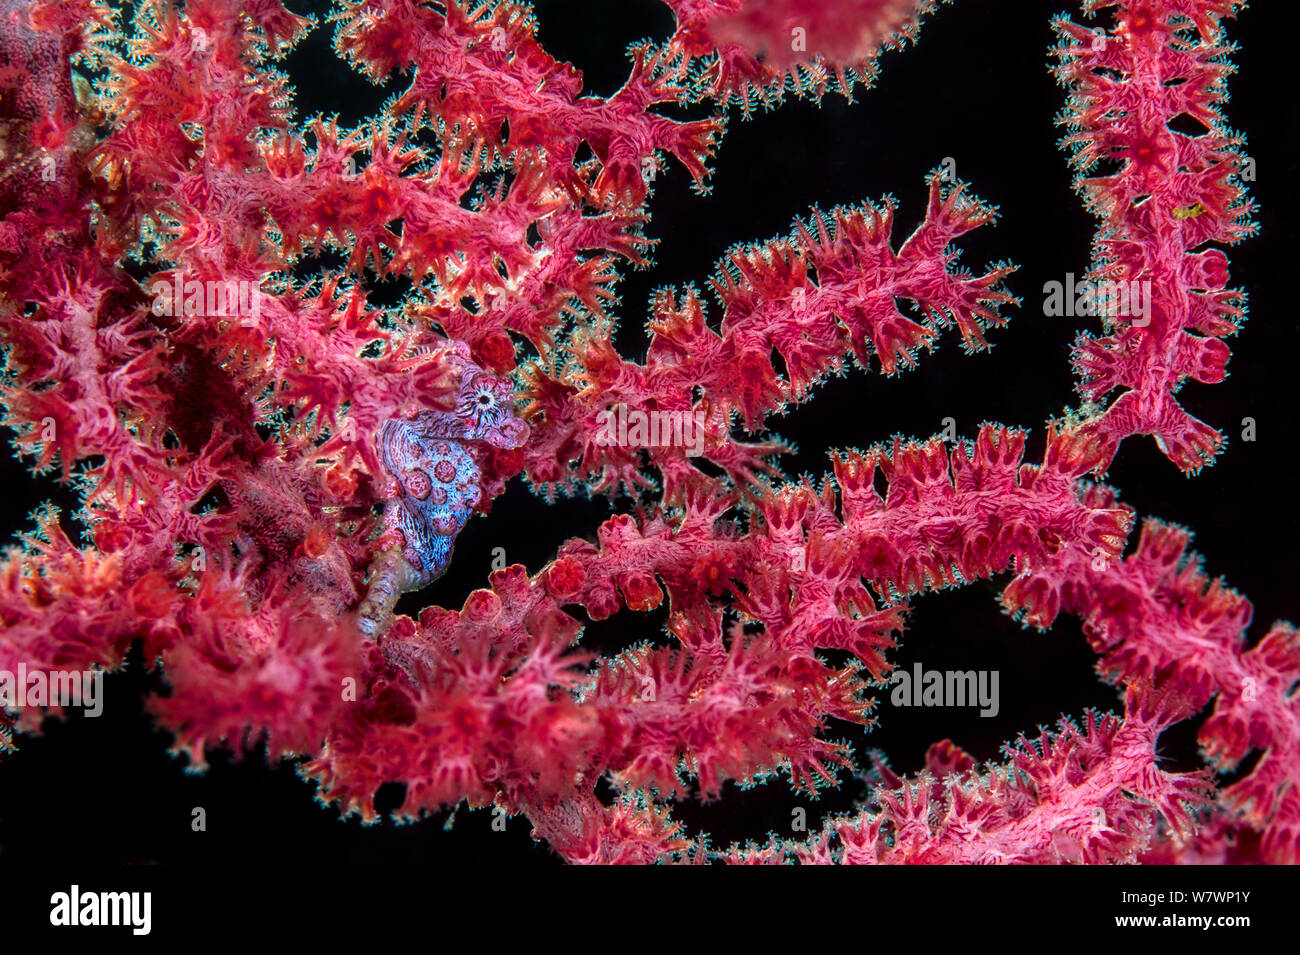 Pygmy seahorse (Hippocampus bargibanti) sheltering in seafan (Muricella sp.), which is backlit by flash. Bitung, North Sulawesi, Indonesia. Lembeh Strait, Molucca Sea. Stock Photo